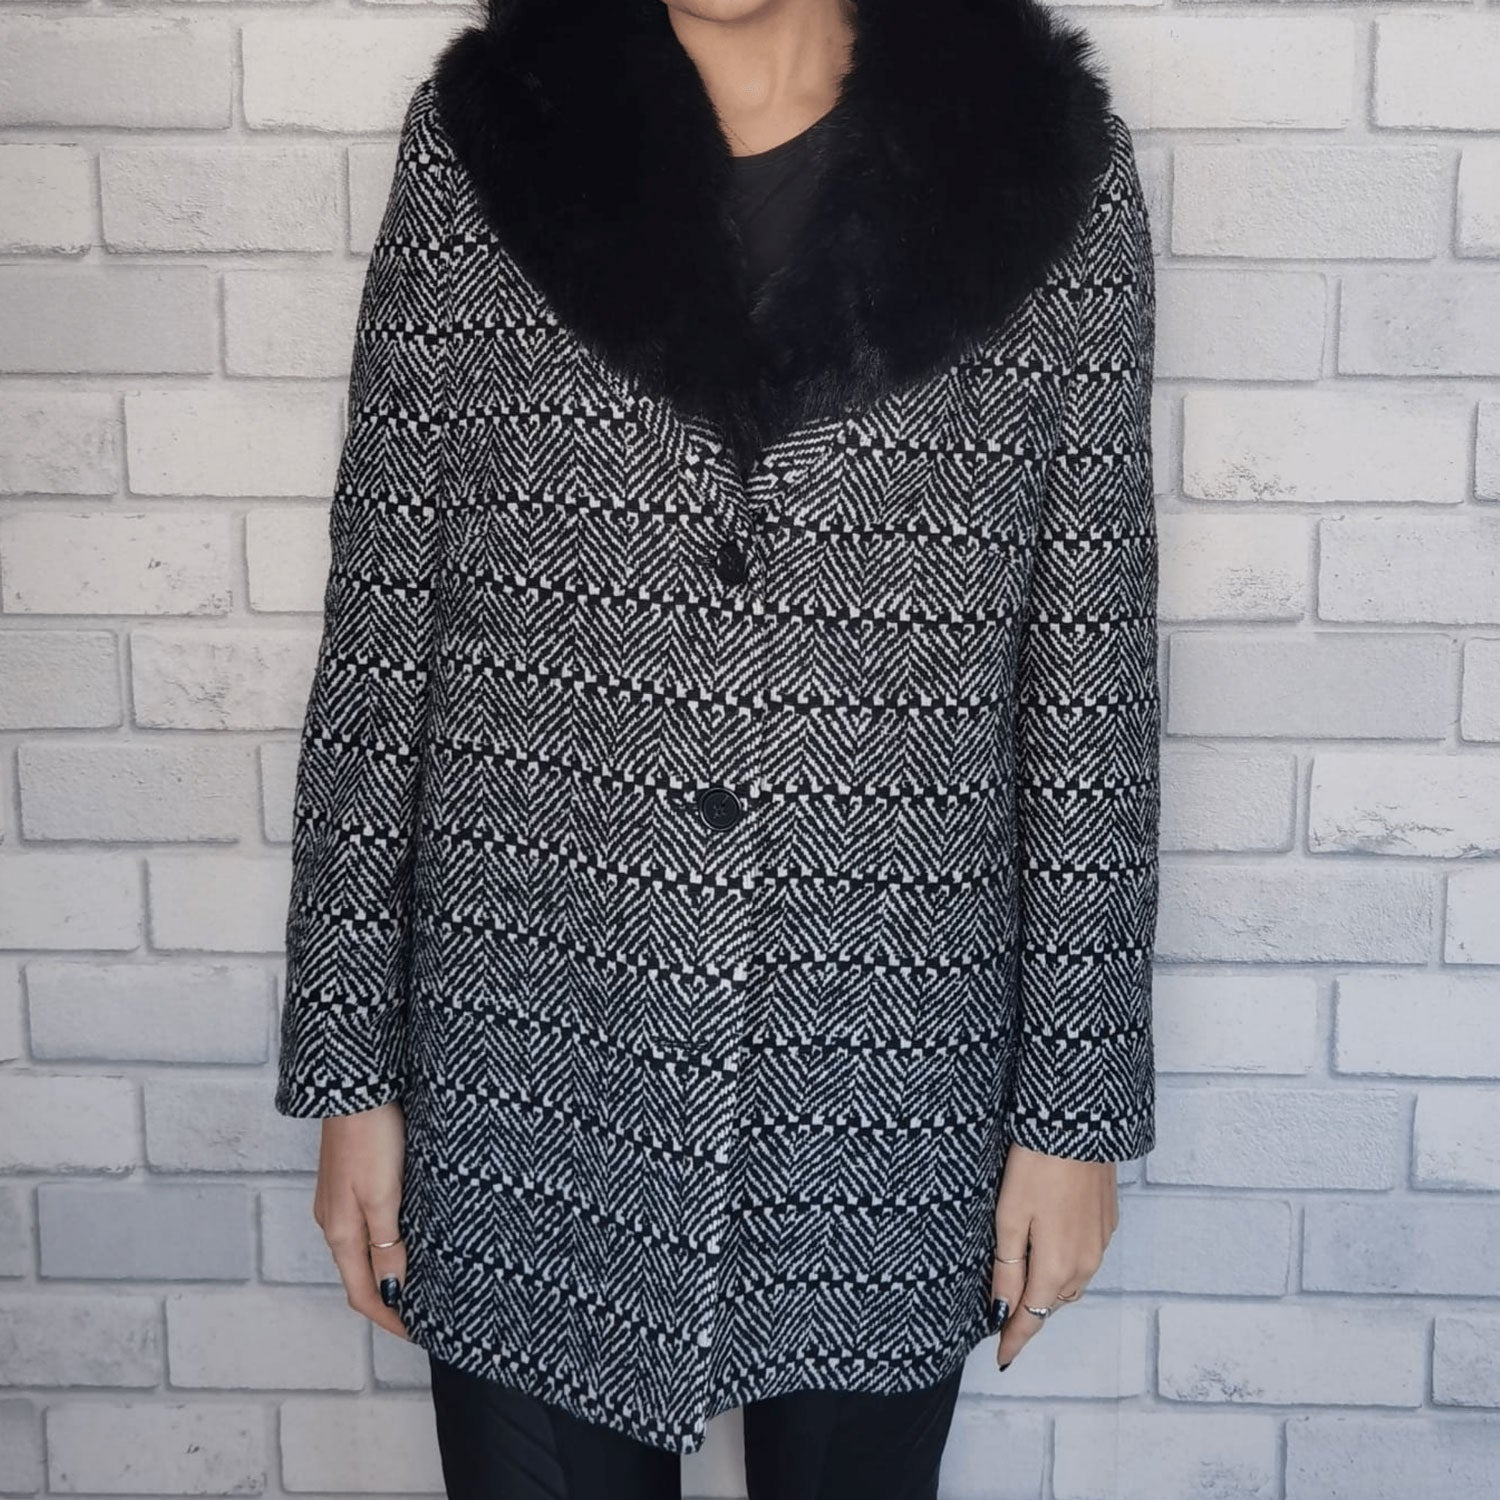 Punt Roma Fur Collar Lined Wool Mix Coat - Black 2 Shaws Department Stores